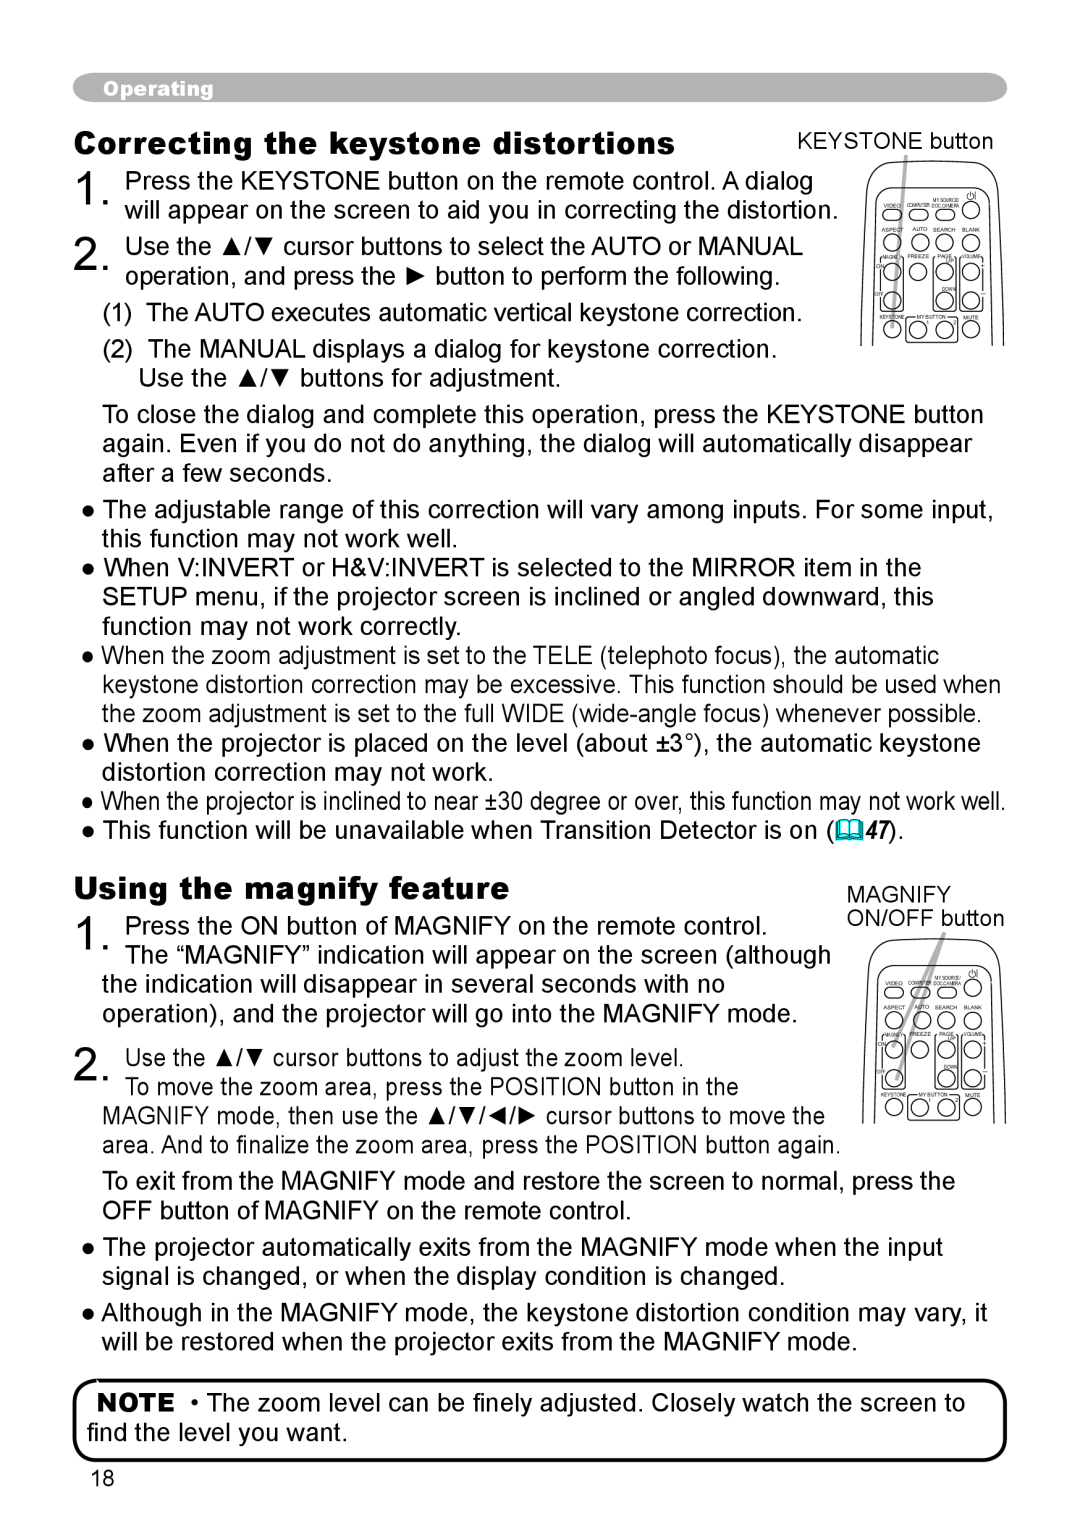 Dukane 8783 user manual Correcting the keystone distortions, Using the magnify feature 